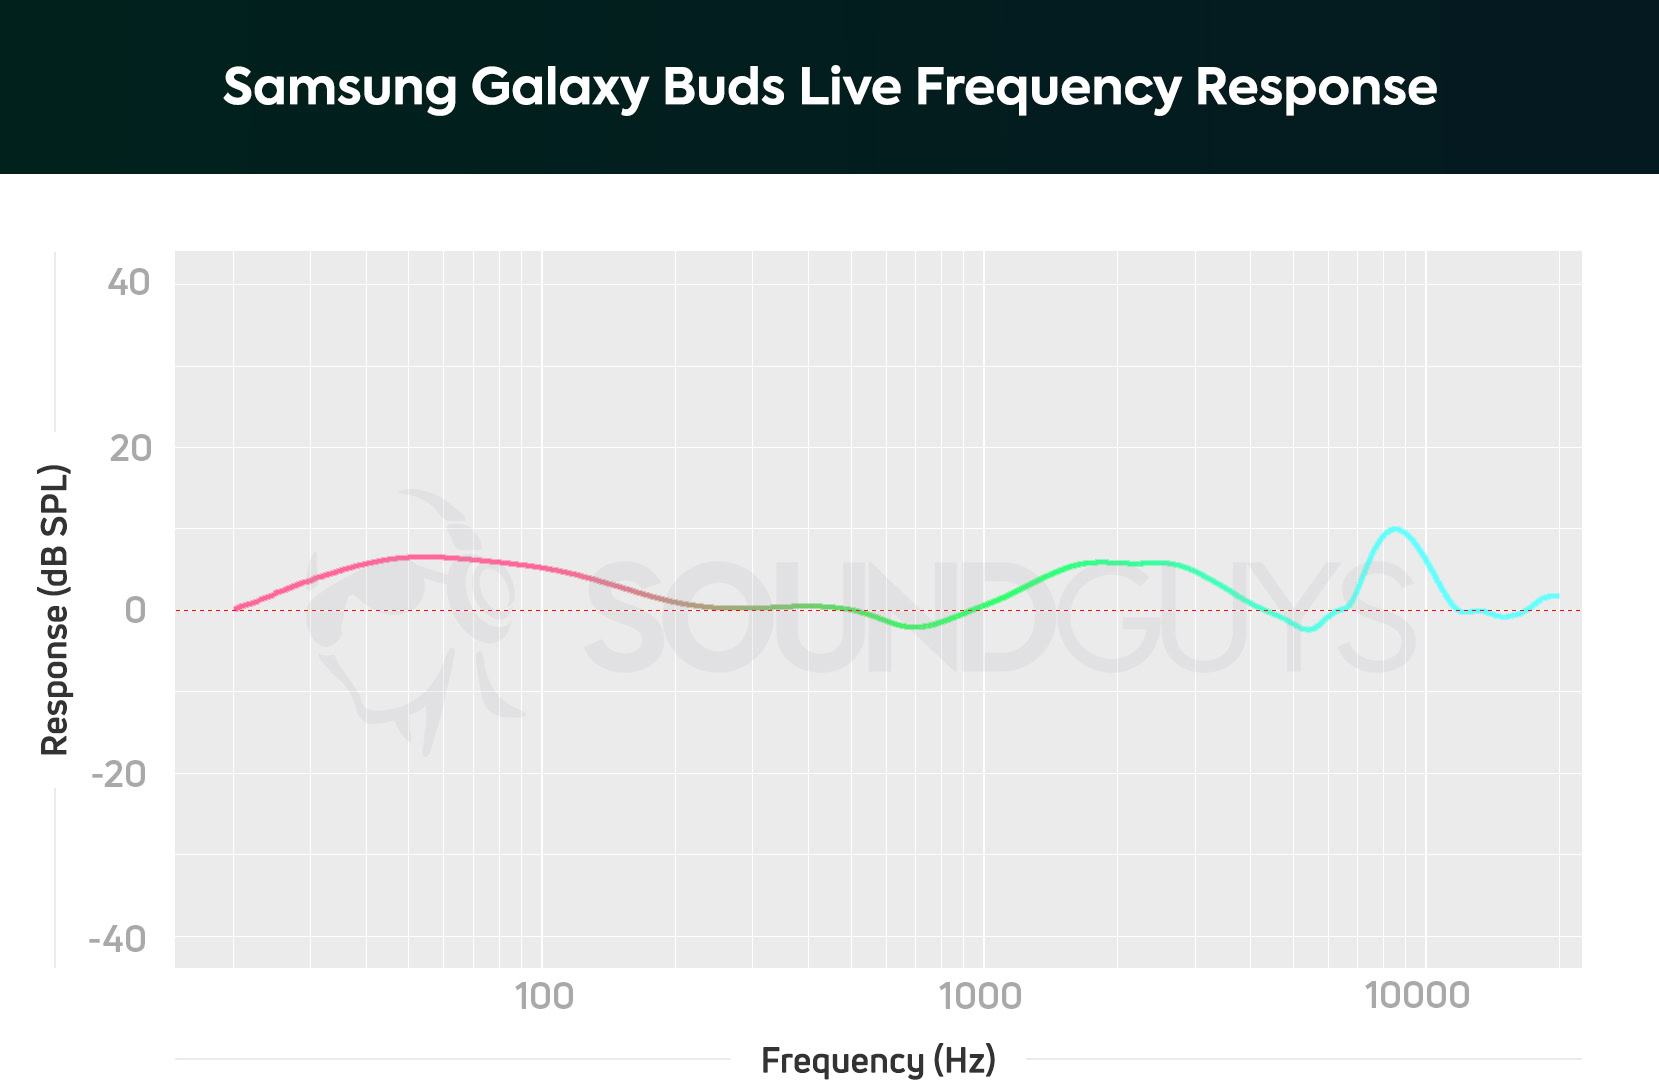 Samsung Galaxy Buds Live SG frequency response chart